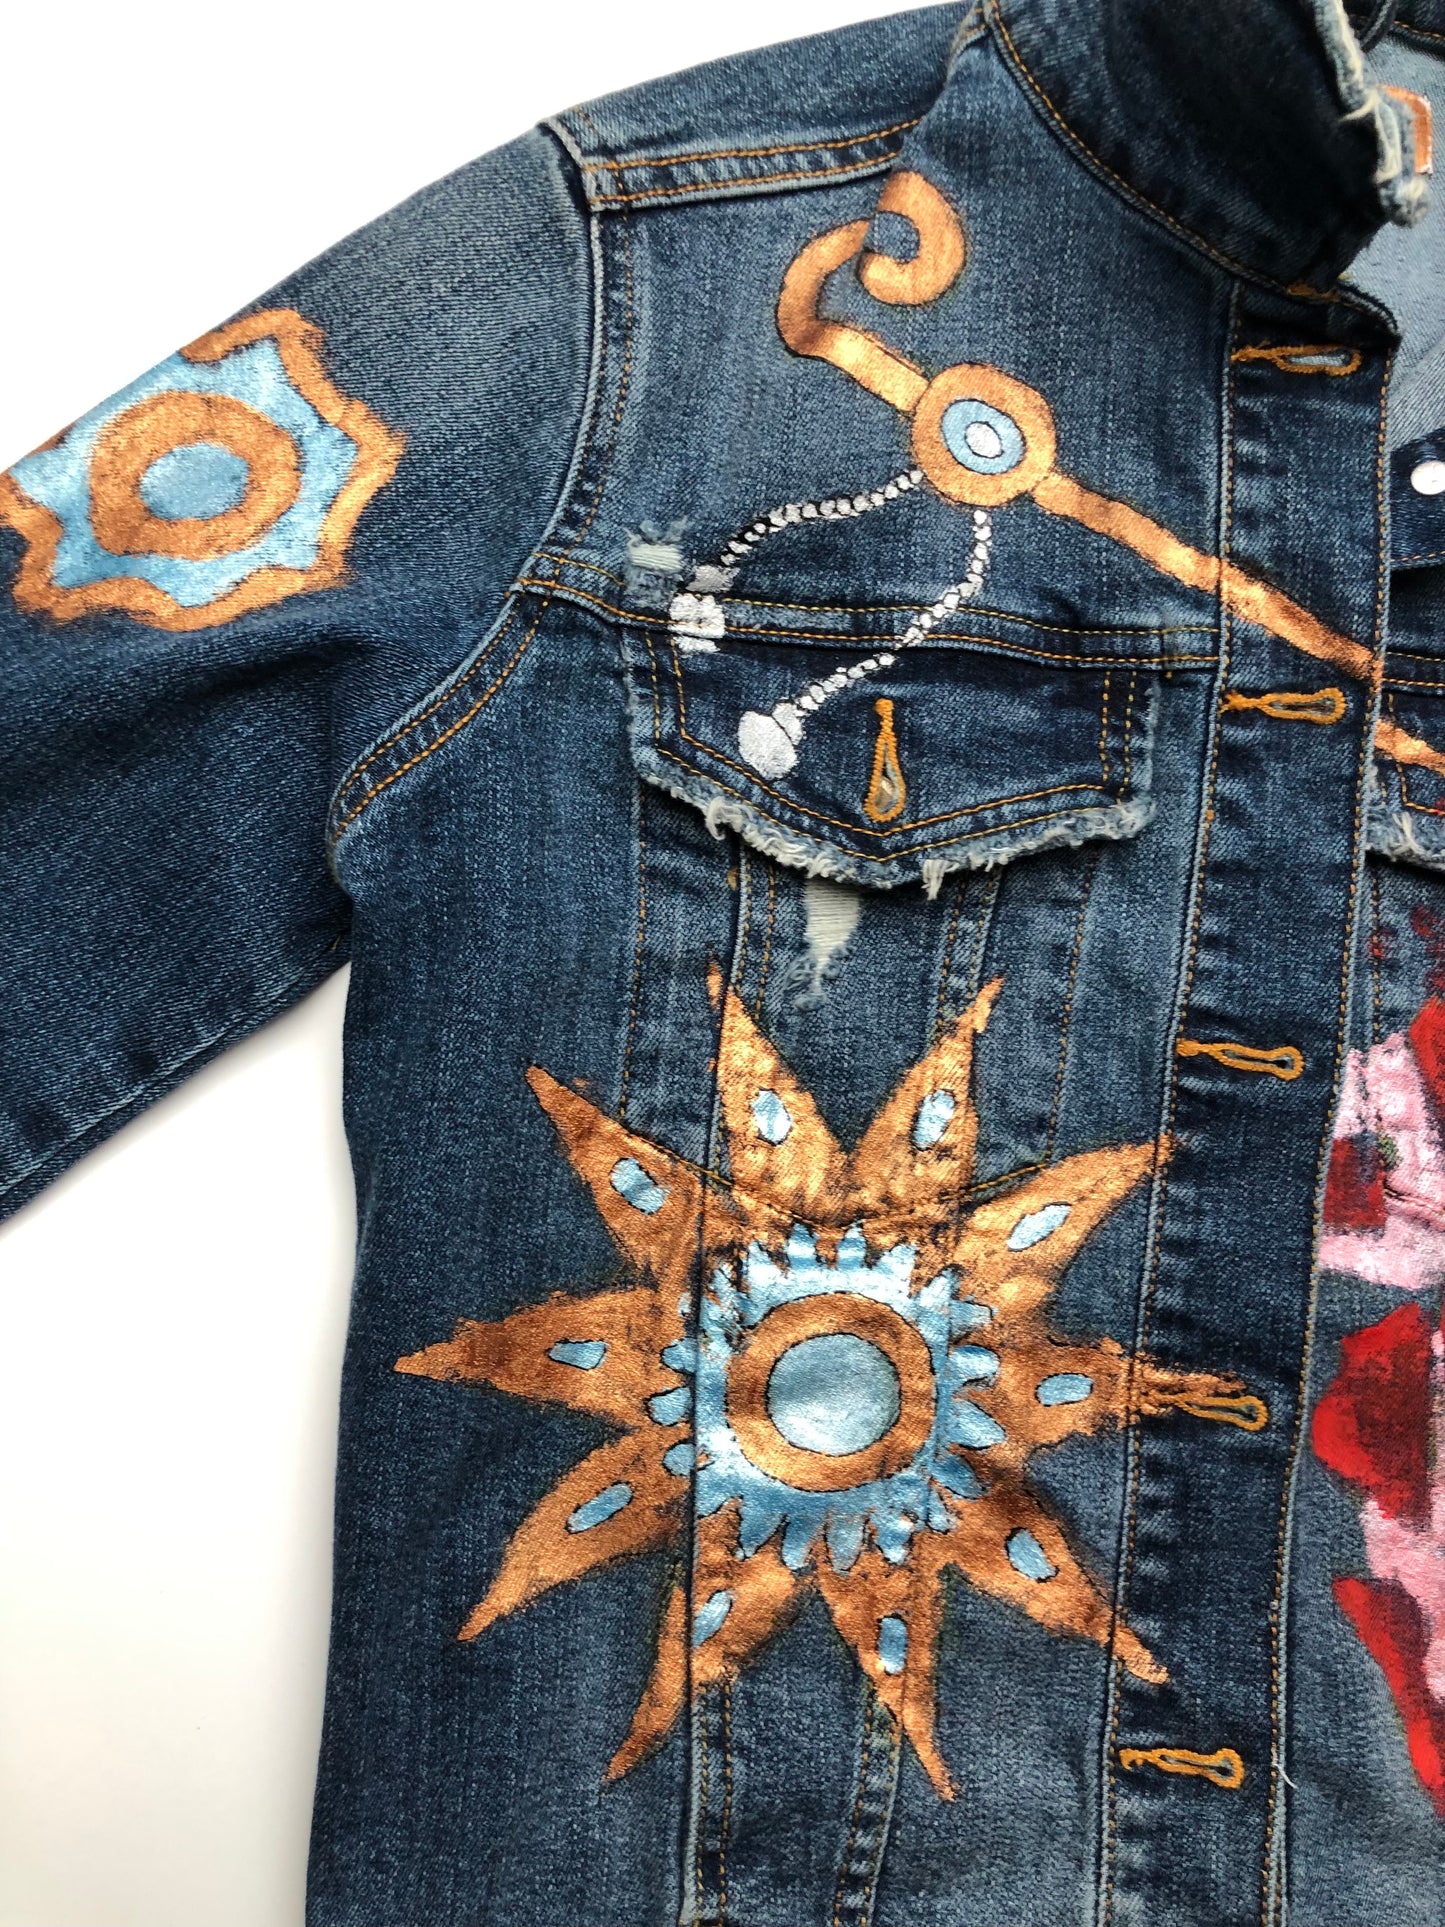 Gold and turquoise star patterns and barrette detail on a women's denim jacket